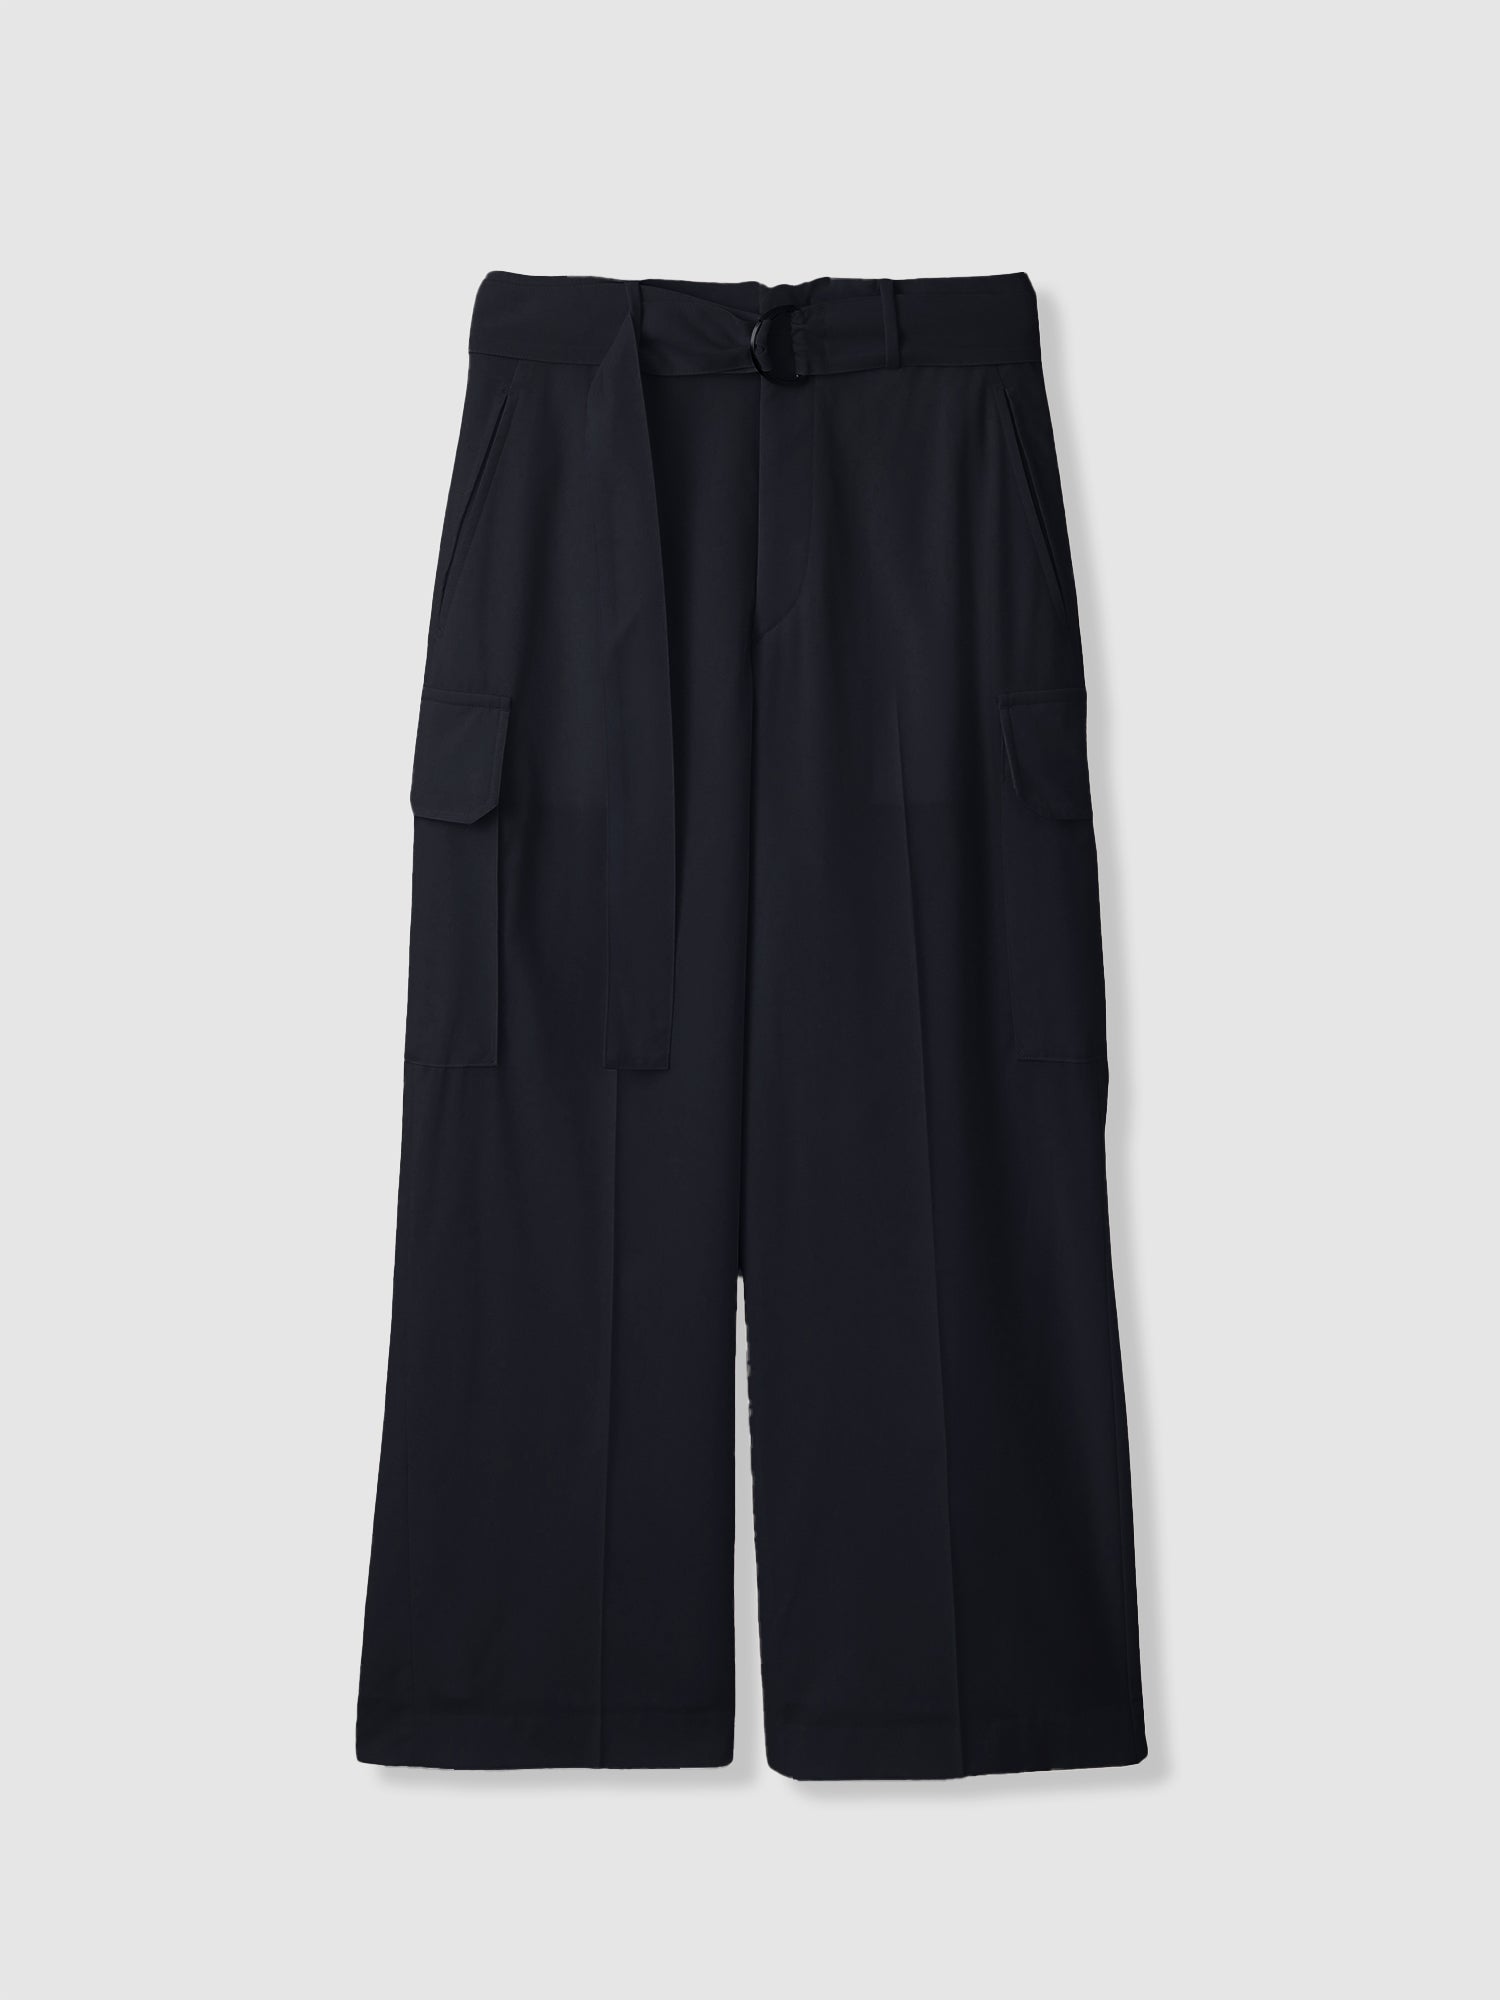 Tropical W Wide Cargo Pants<BR>新着アイテム|春夏シーズン